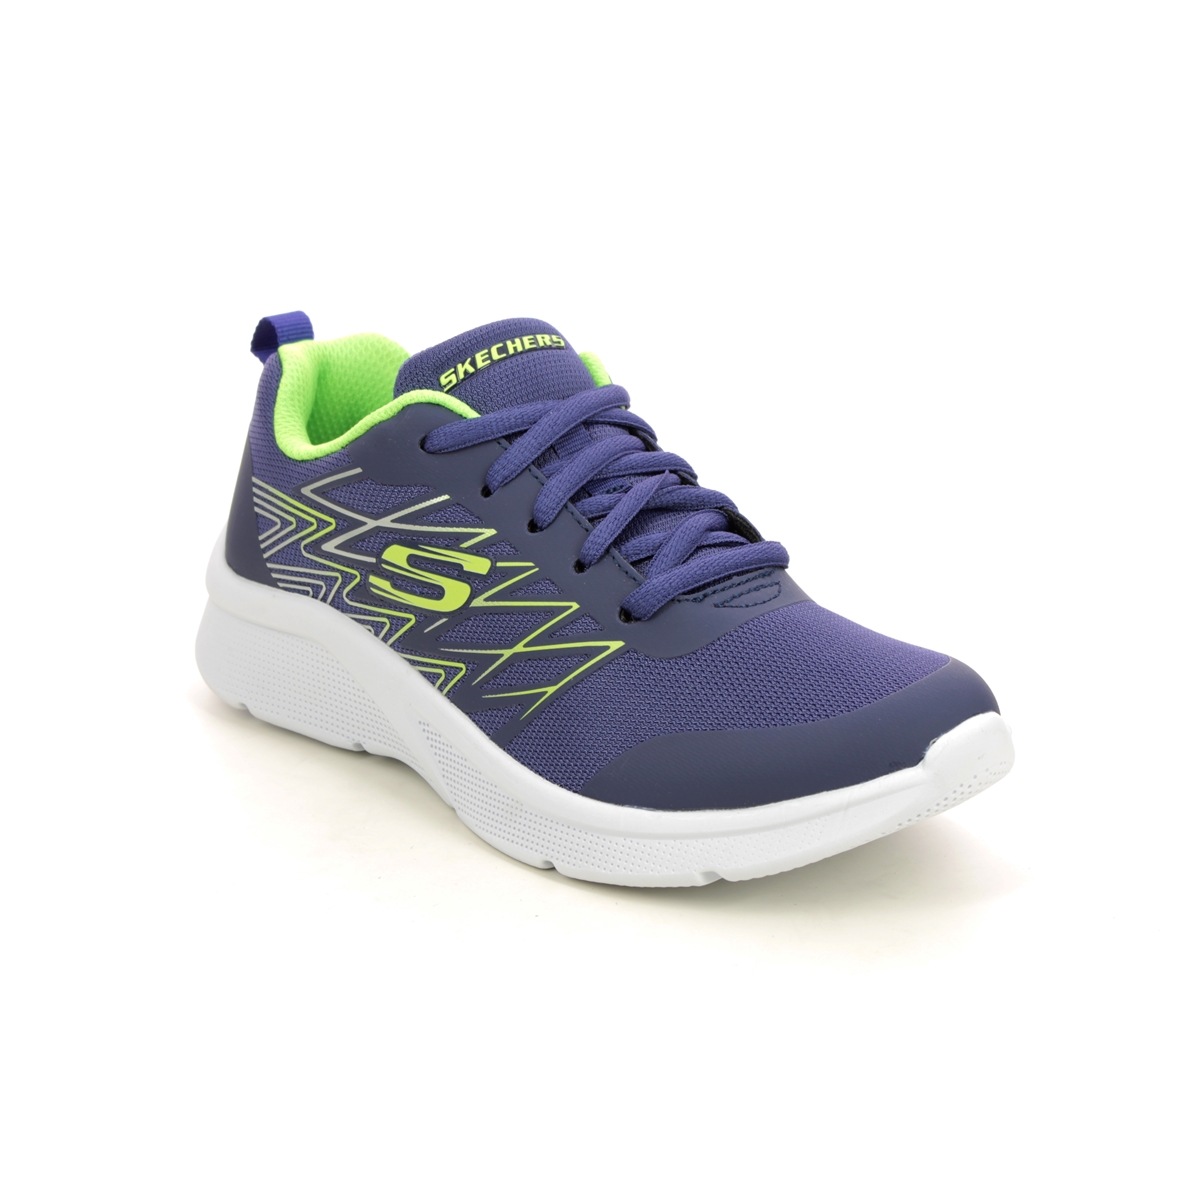 Skechers Microspec Lace Navy Lime Kids Trainers 403769L In Size 35 In Plain Navy Lime For kids